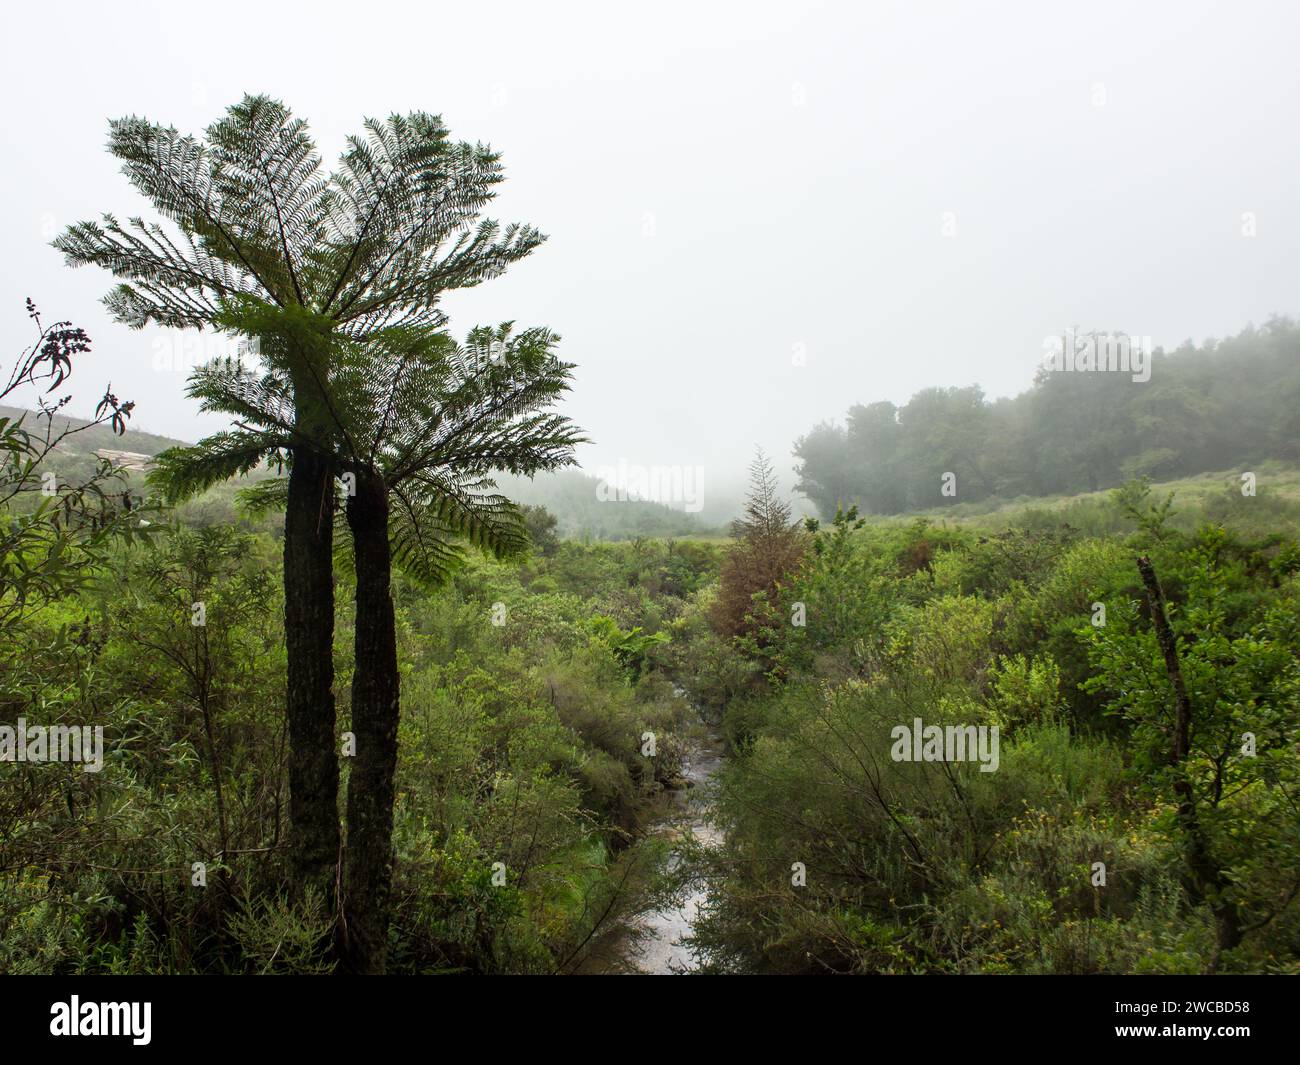 Two tall Grassland tree ferns, Cyathea dregei, with the forest and mountains in the background shrouded in mist in Magoebaskloof South Africa. Stock Photo